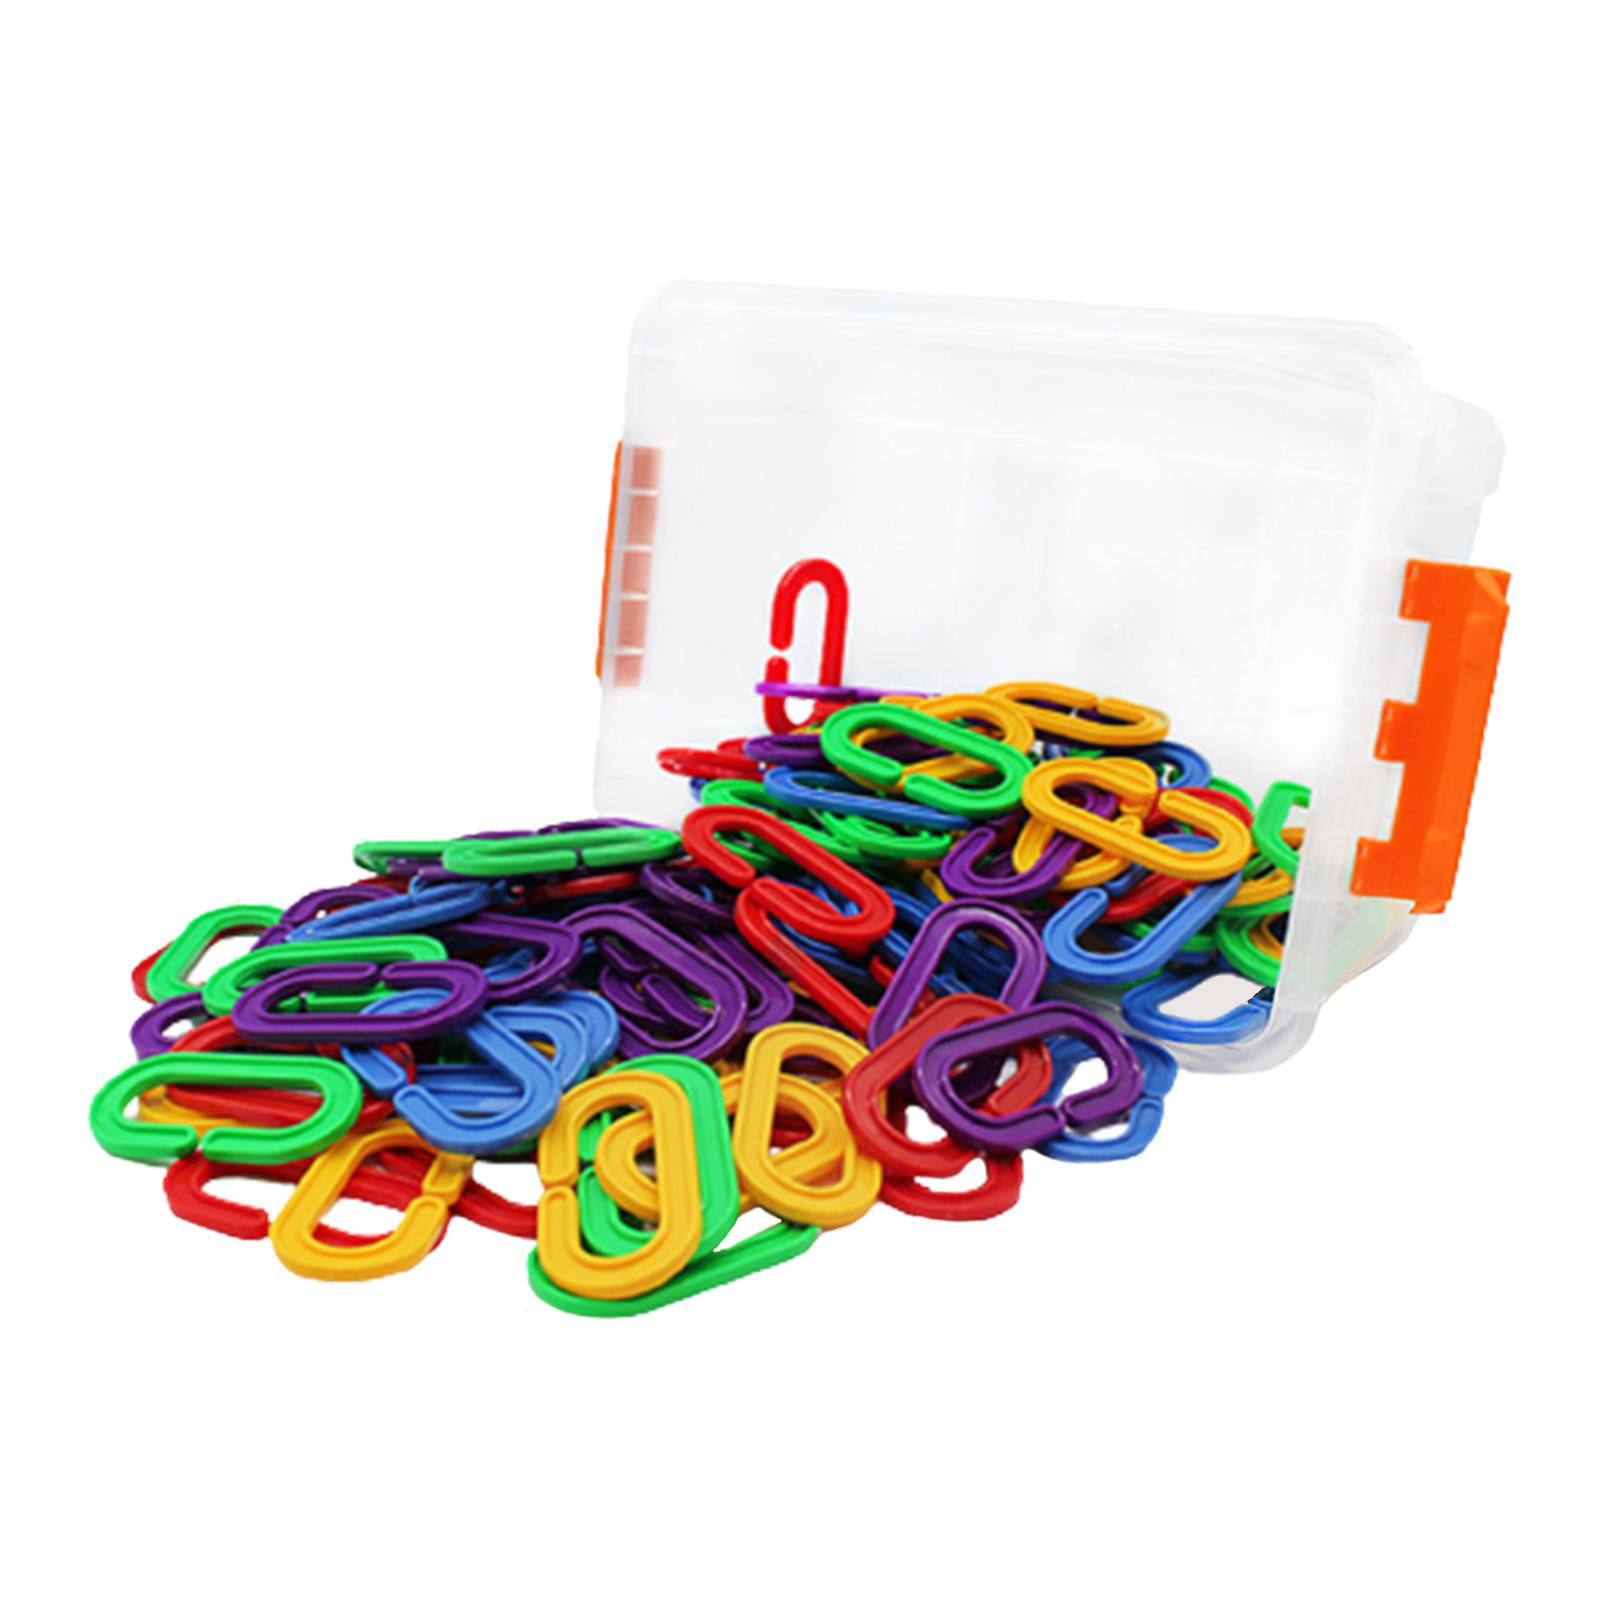 Plastic Chain Link Toy